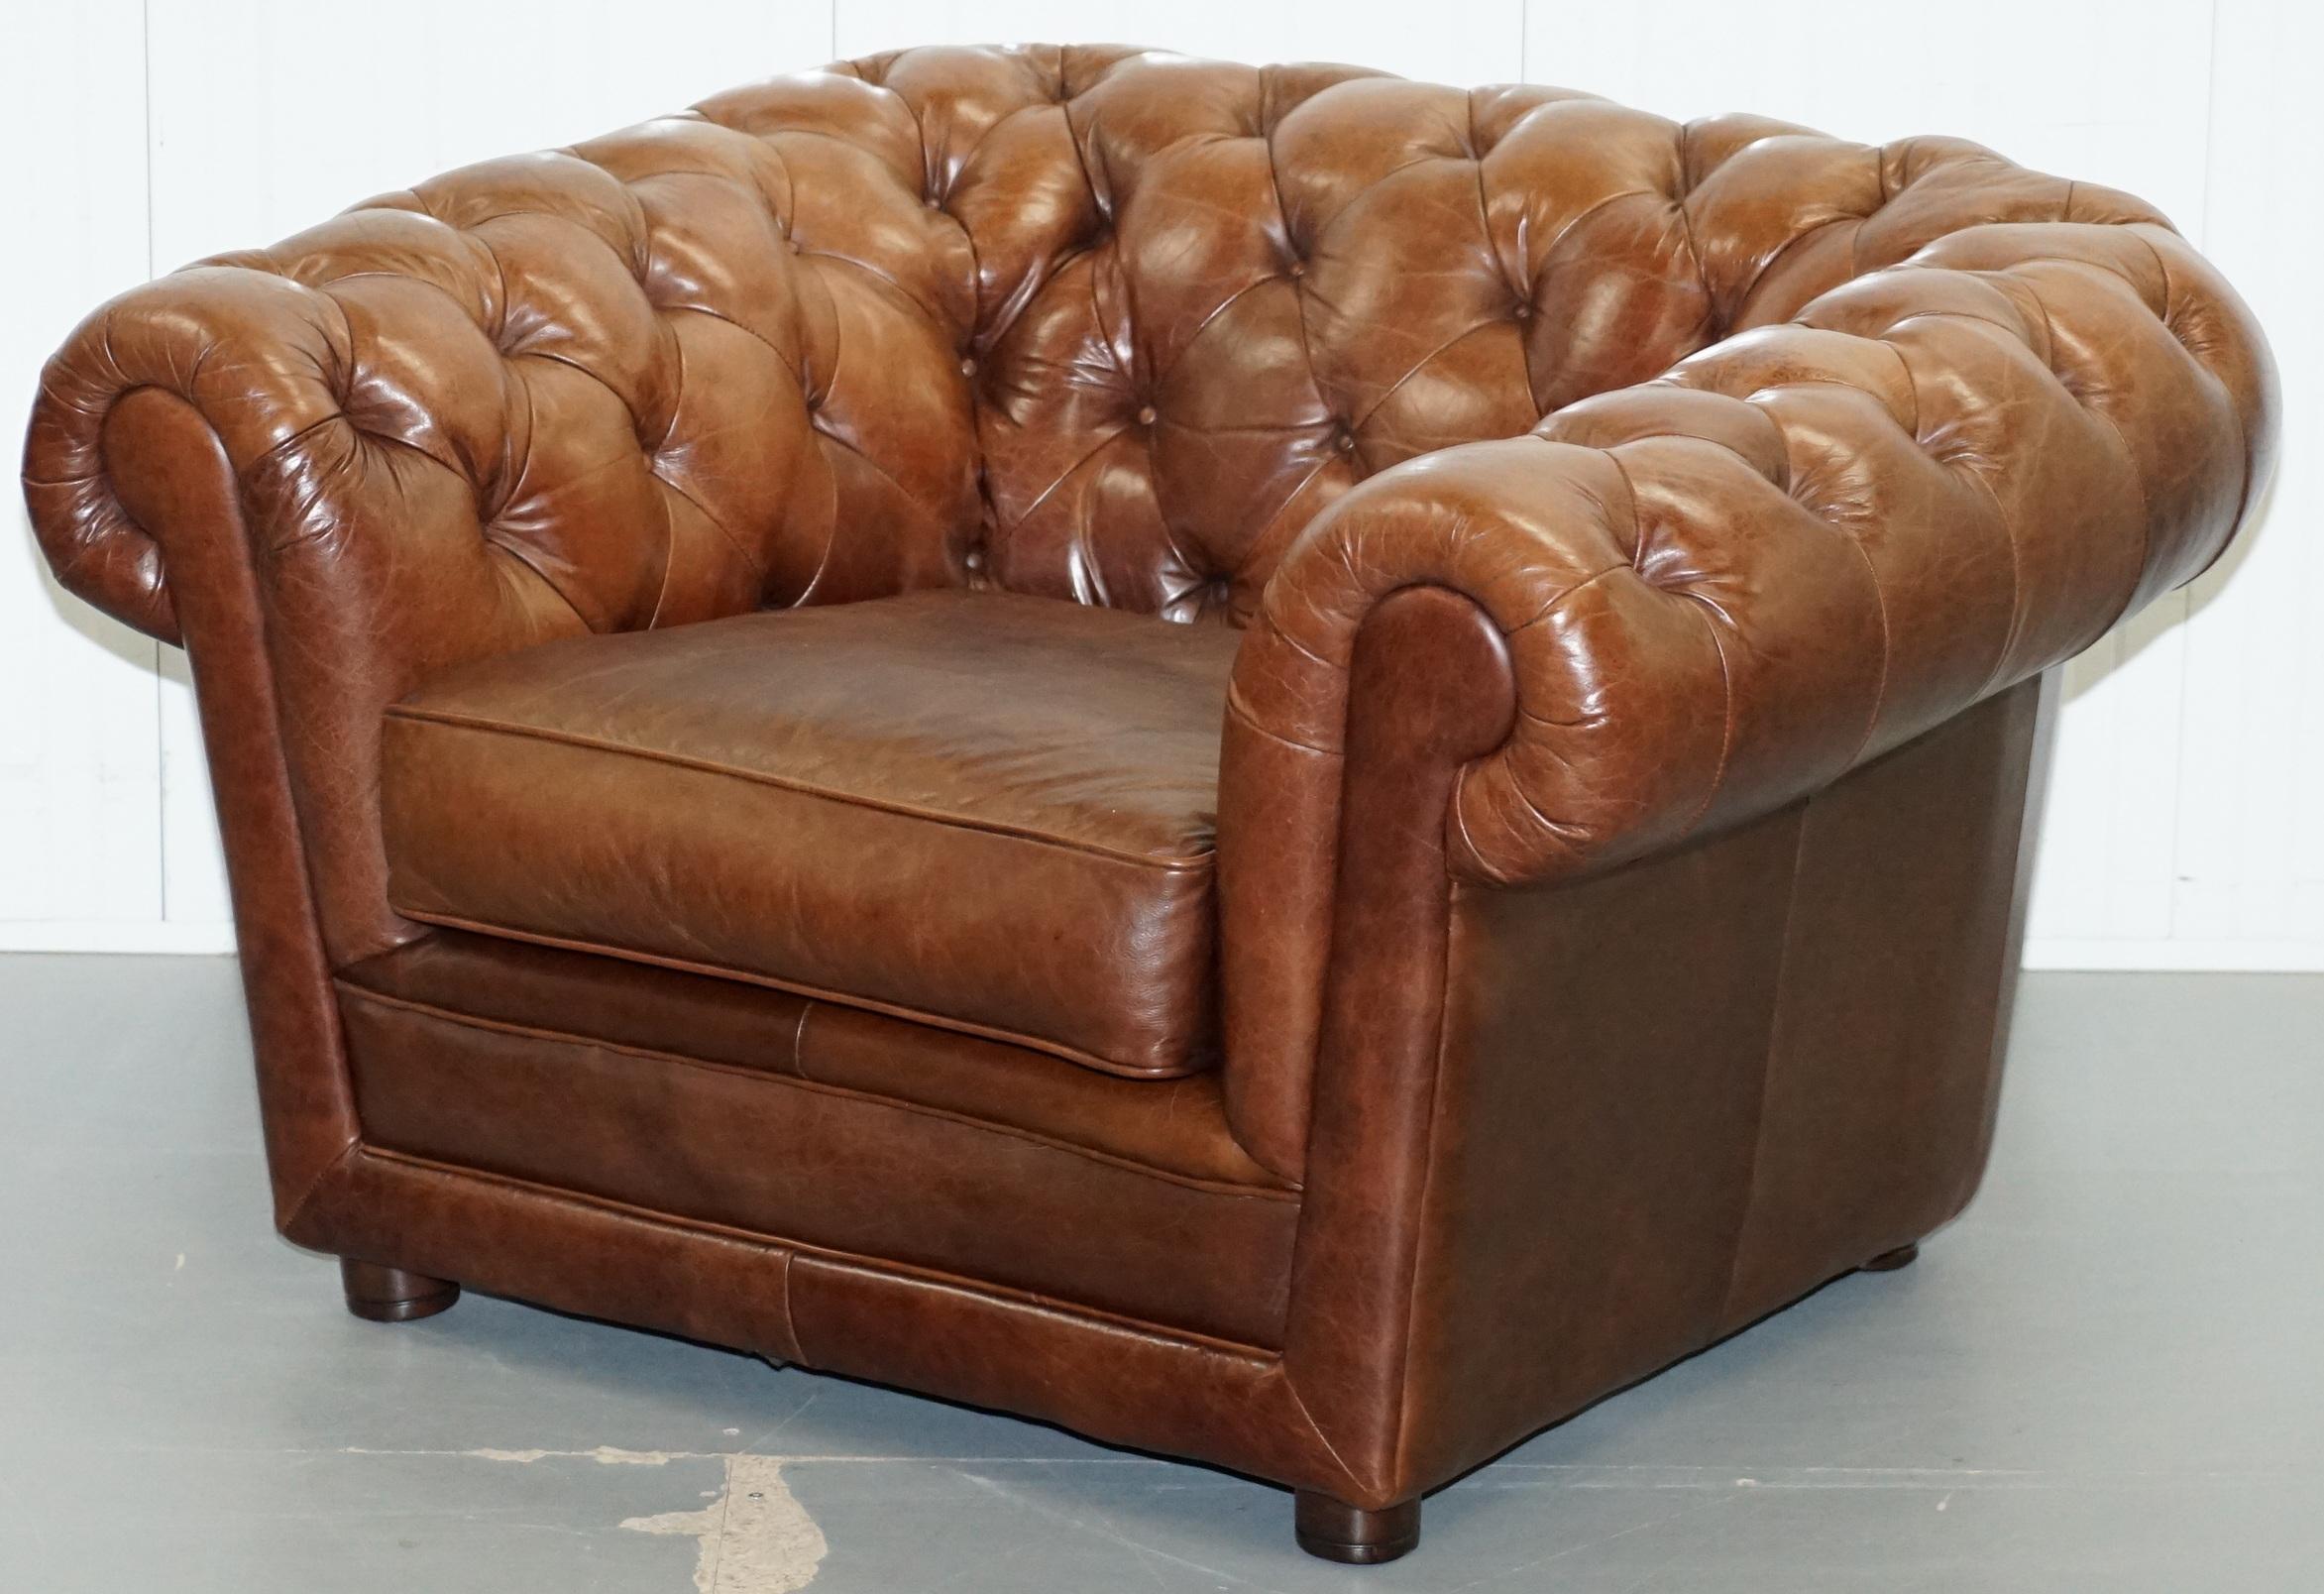 British Large Heritage Leather Sloped Arm Aged Brown Leather Chesterfield Club Armchair